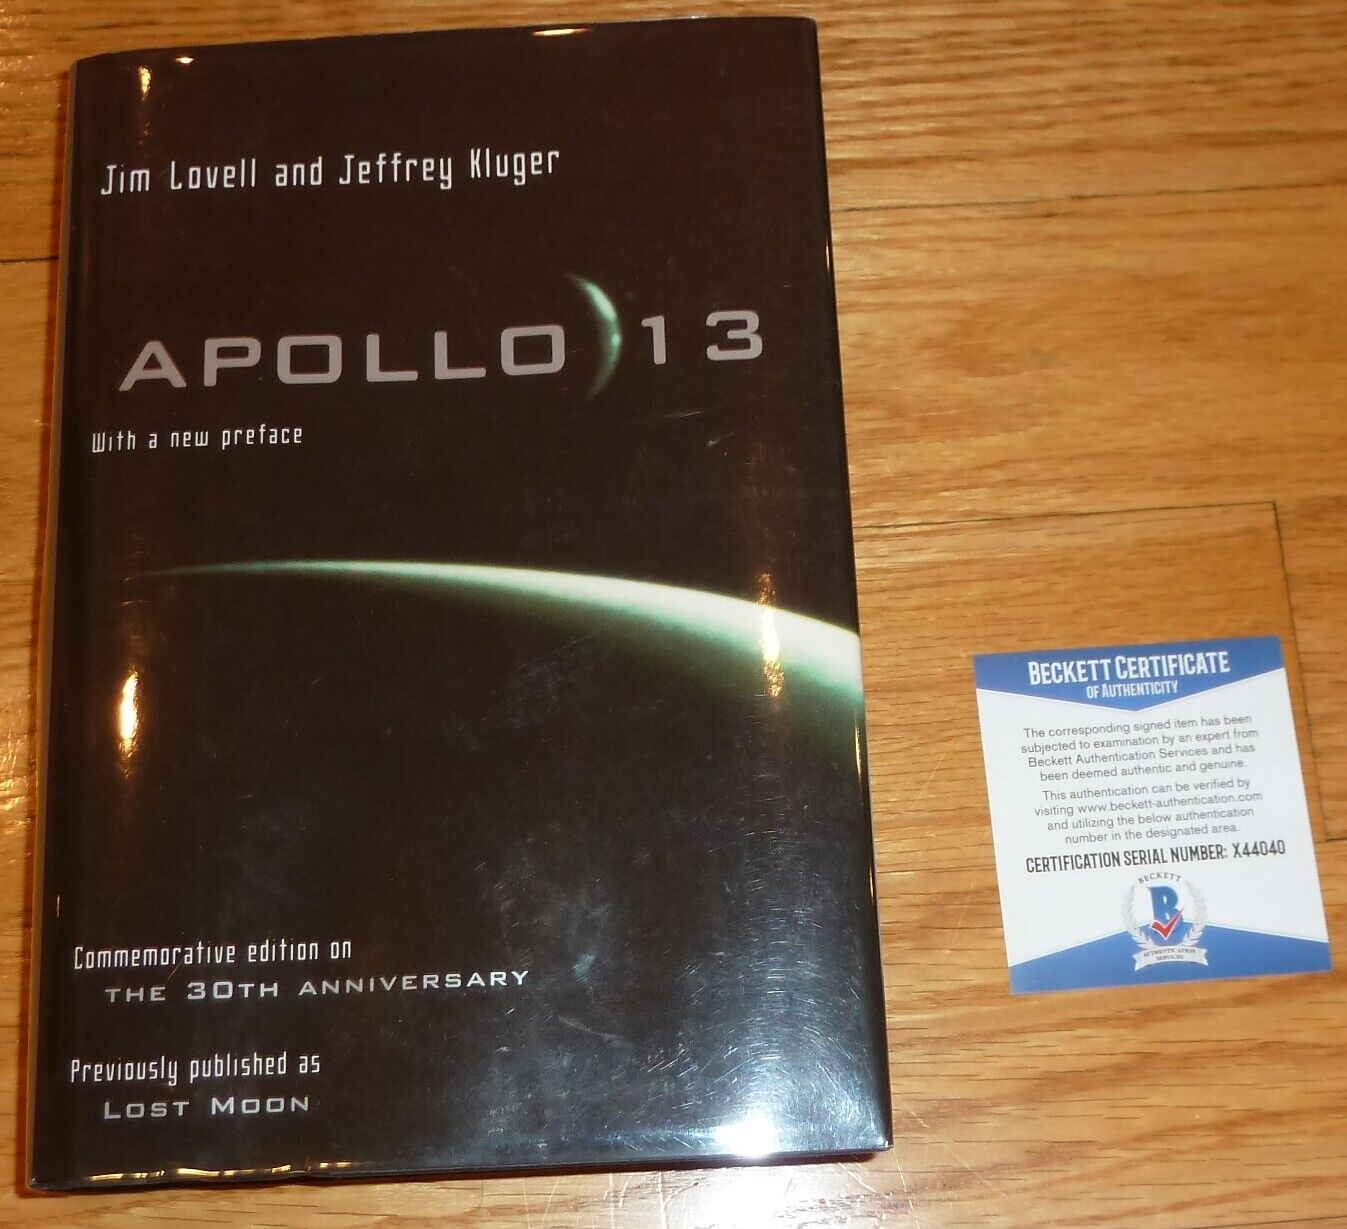 Beckett Captain Jim-james Lovell Signed Apollo 13 Hardcover Book 44040 Lost Moon